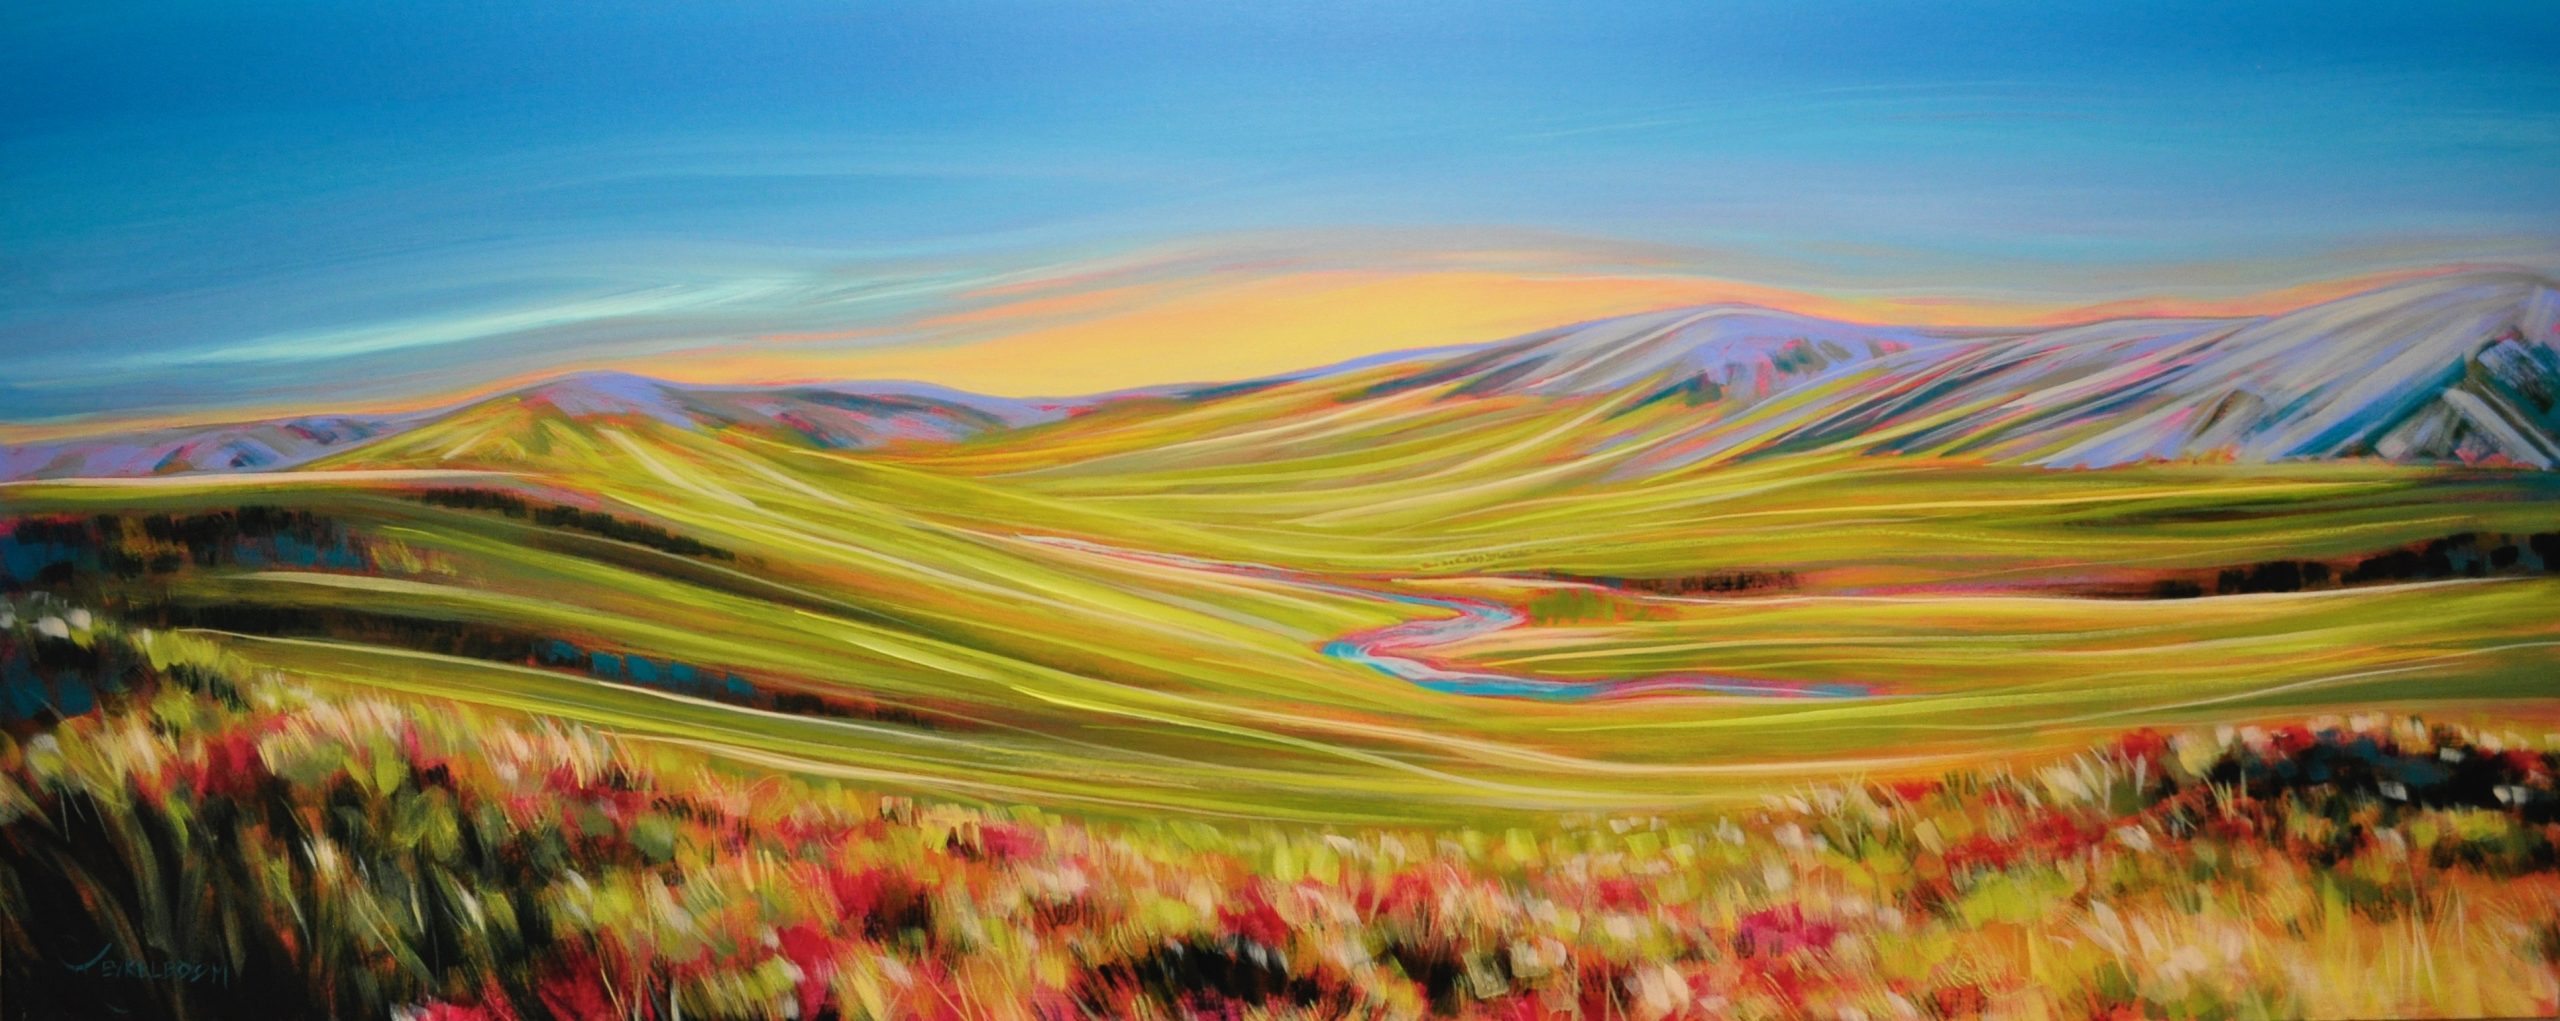 Wonder of the Foothills, acrylic landscape painting by Kayla Eykelboom | Effusion Art Gallery + Cast Glass Studio, Invermere BC